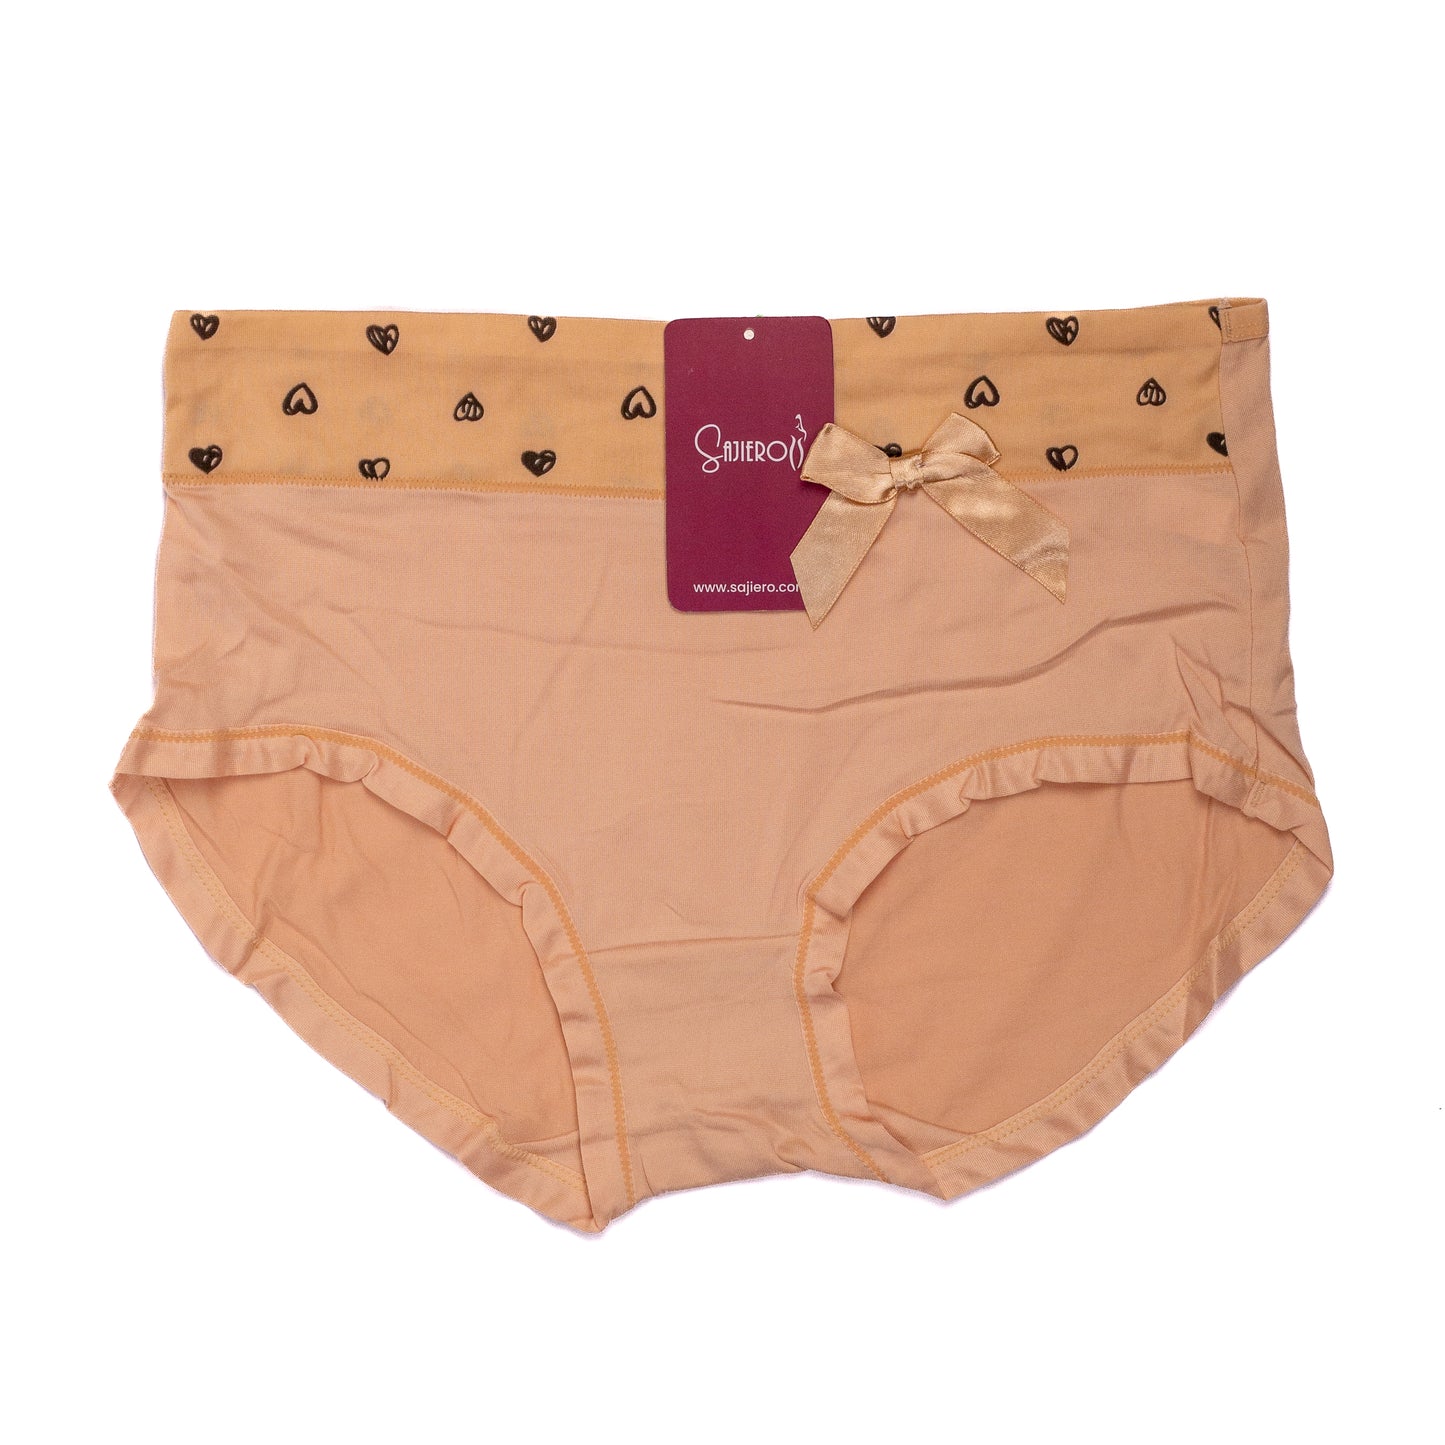 Heart Printed Brief Cotton Panty